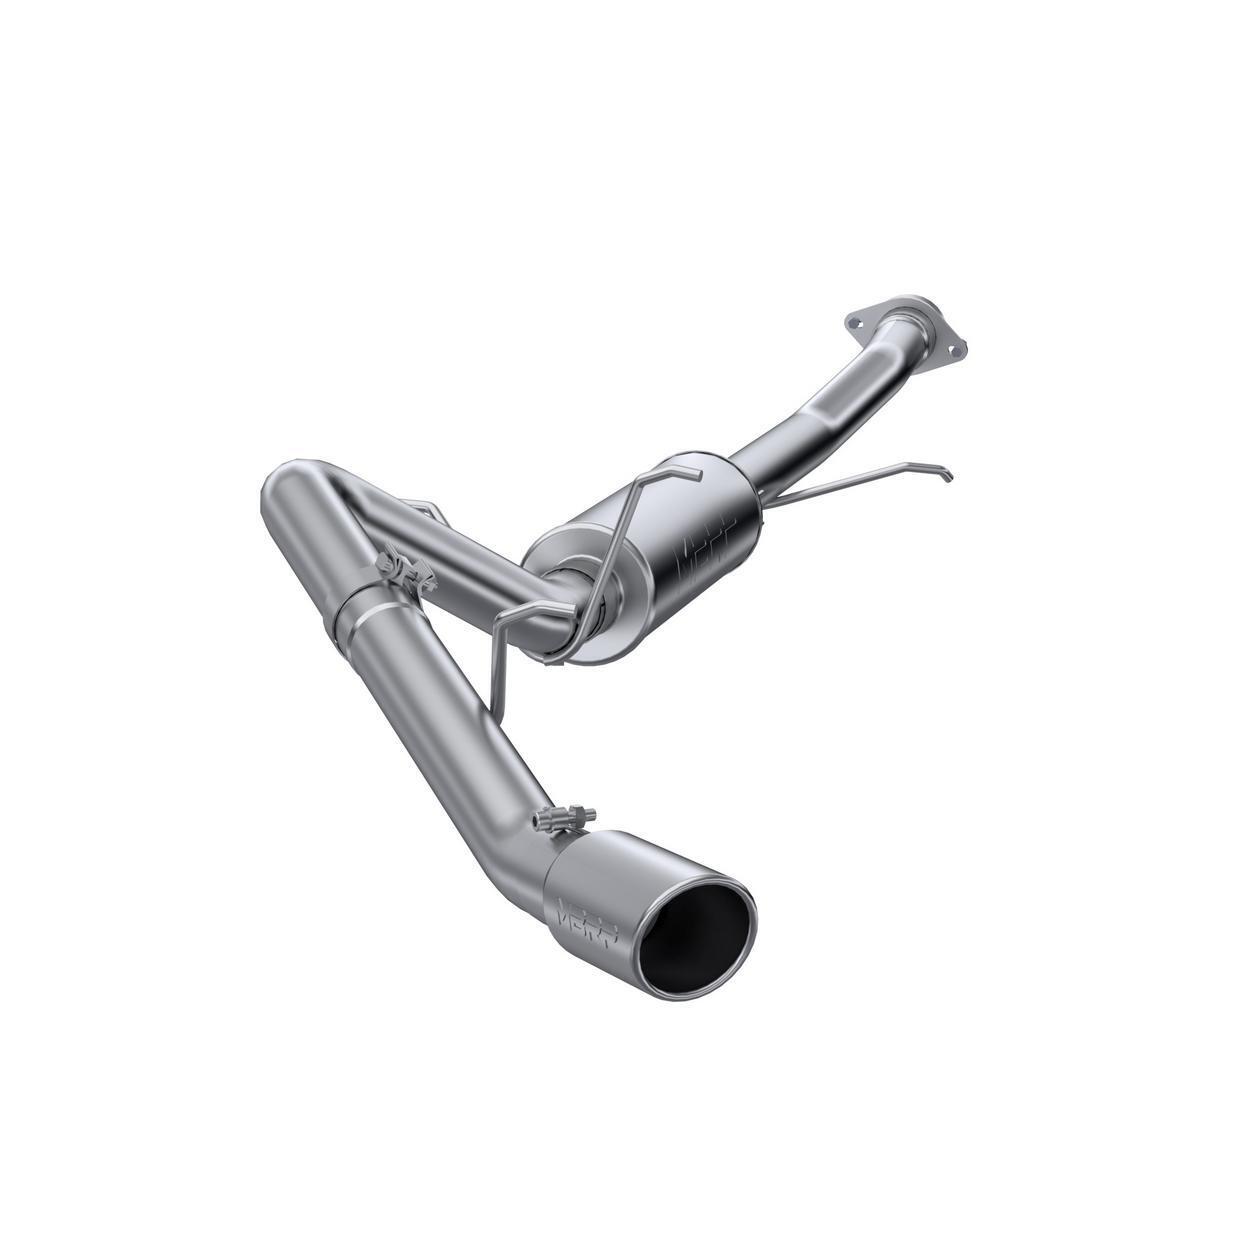 MBRP Exhaust System Kit for 2007-2010 Cadillac Escalade ESV